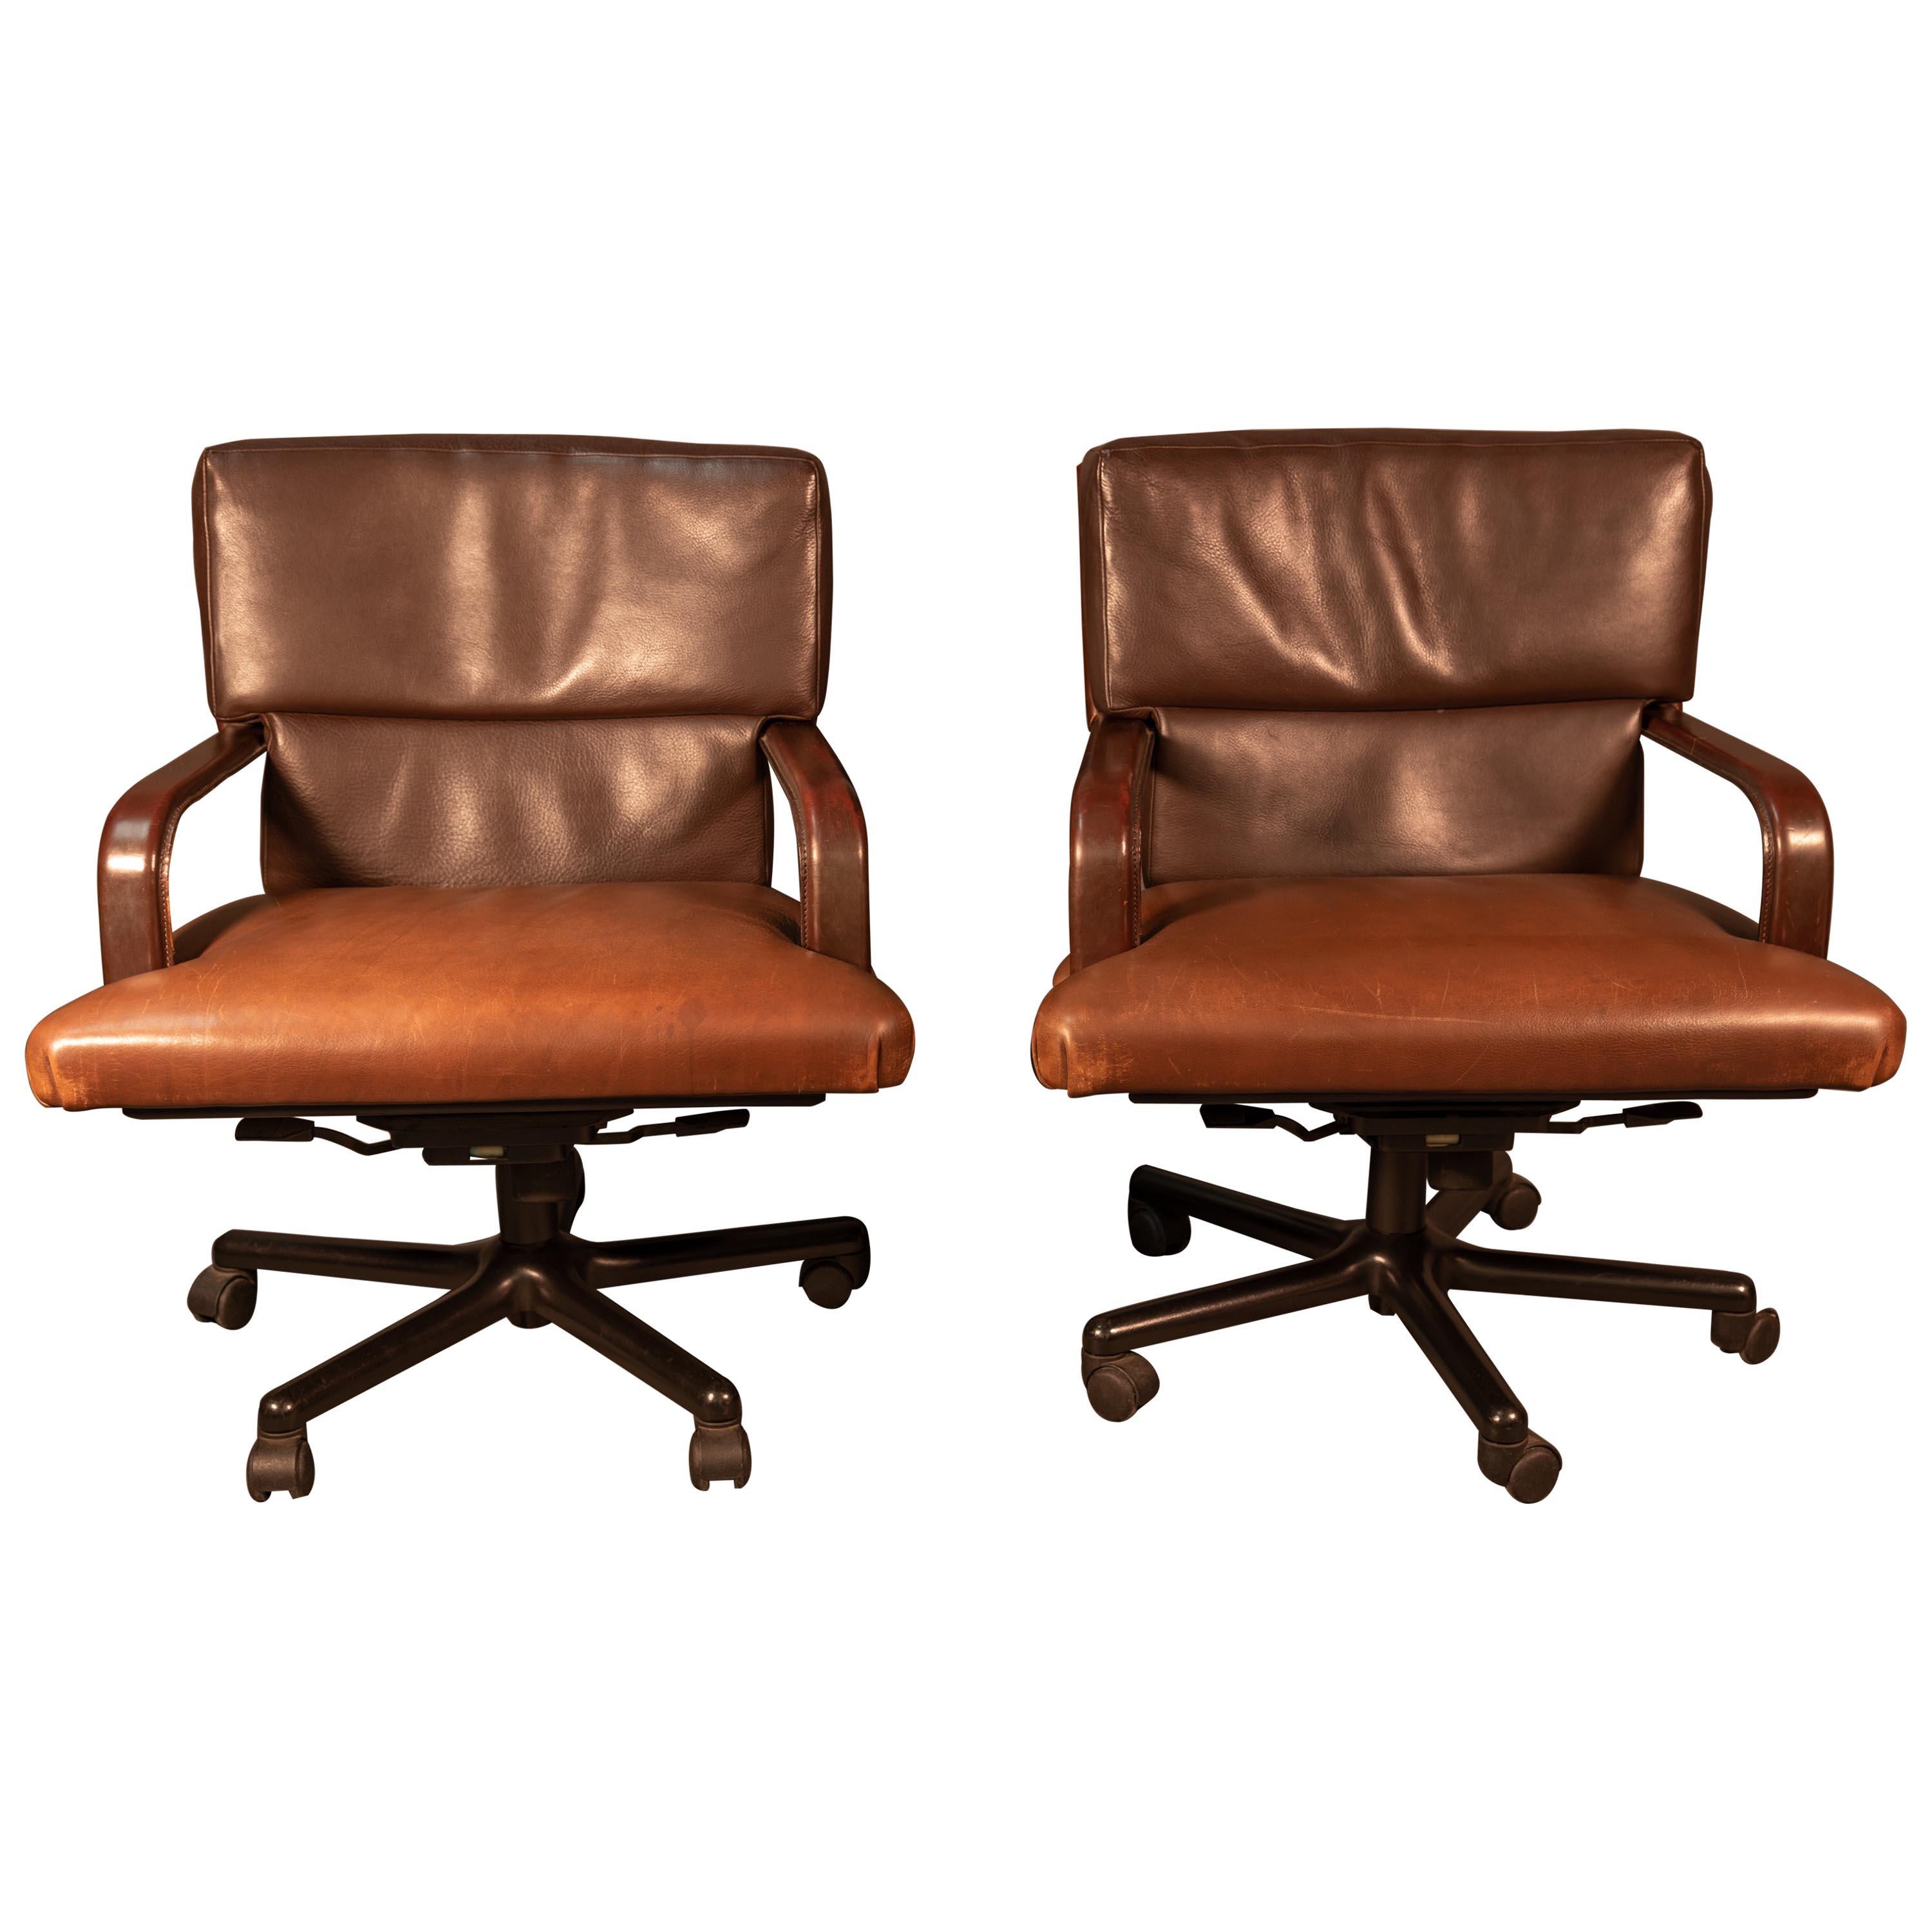 Pair of Vintage Signed Matteo Grassi Swivel Office Chairs